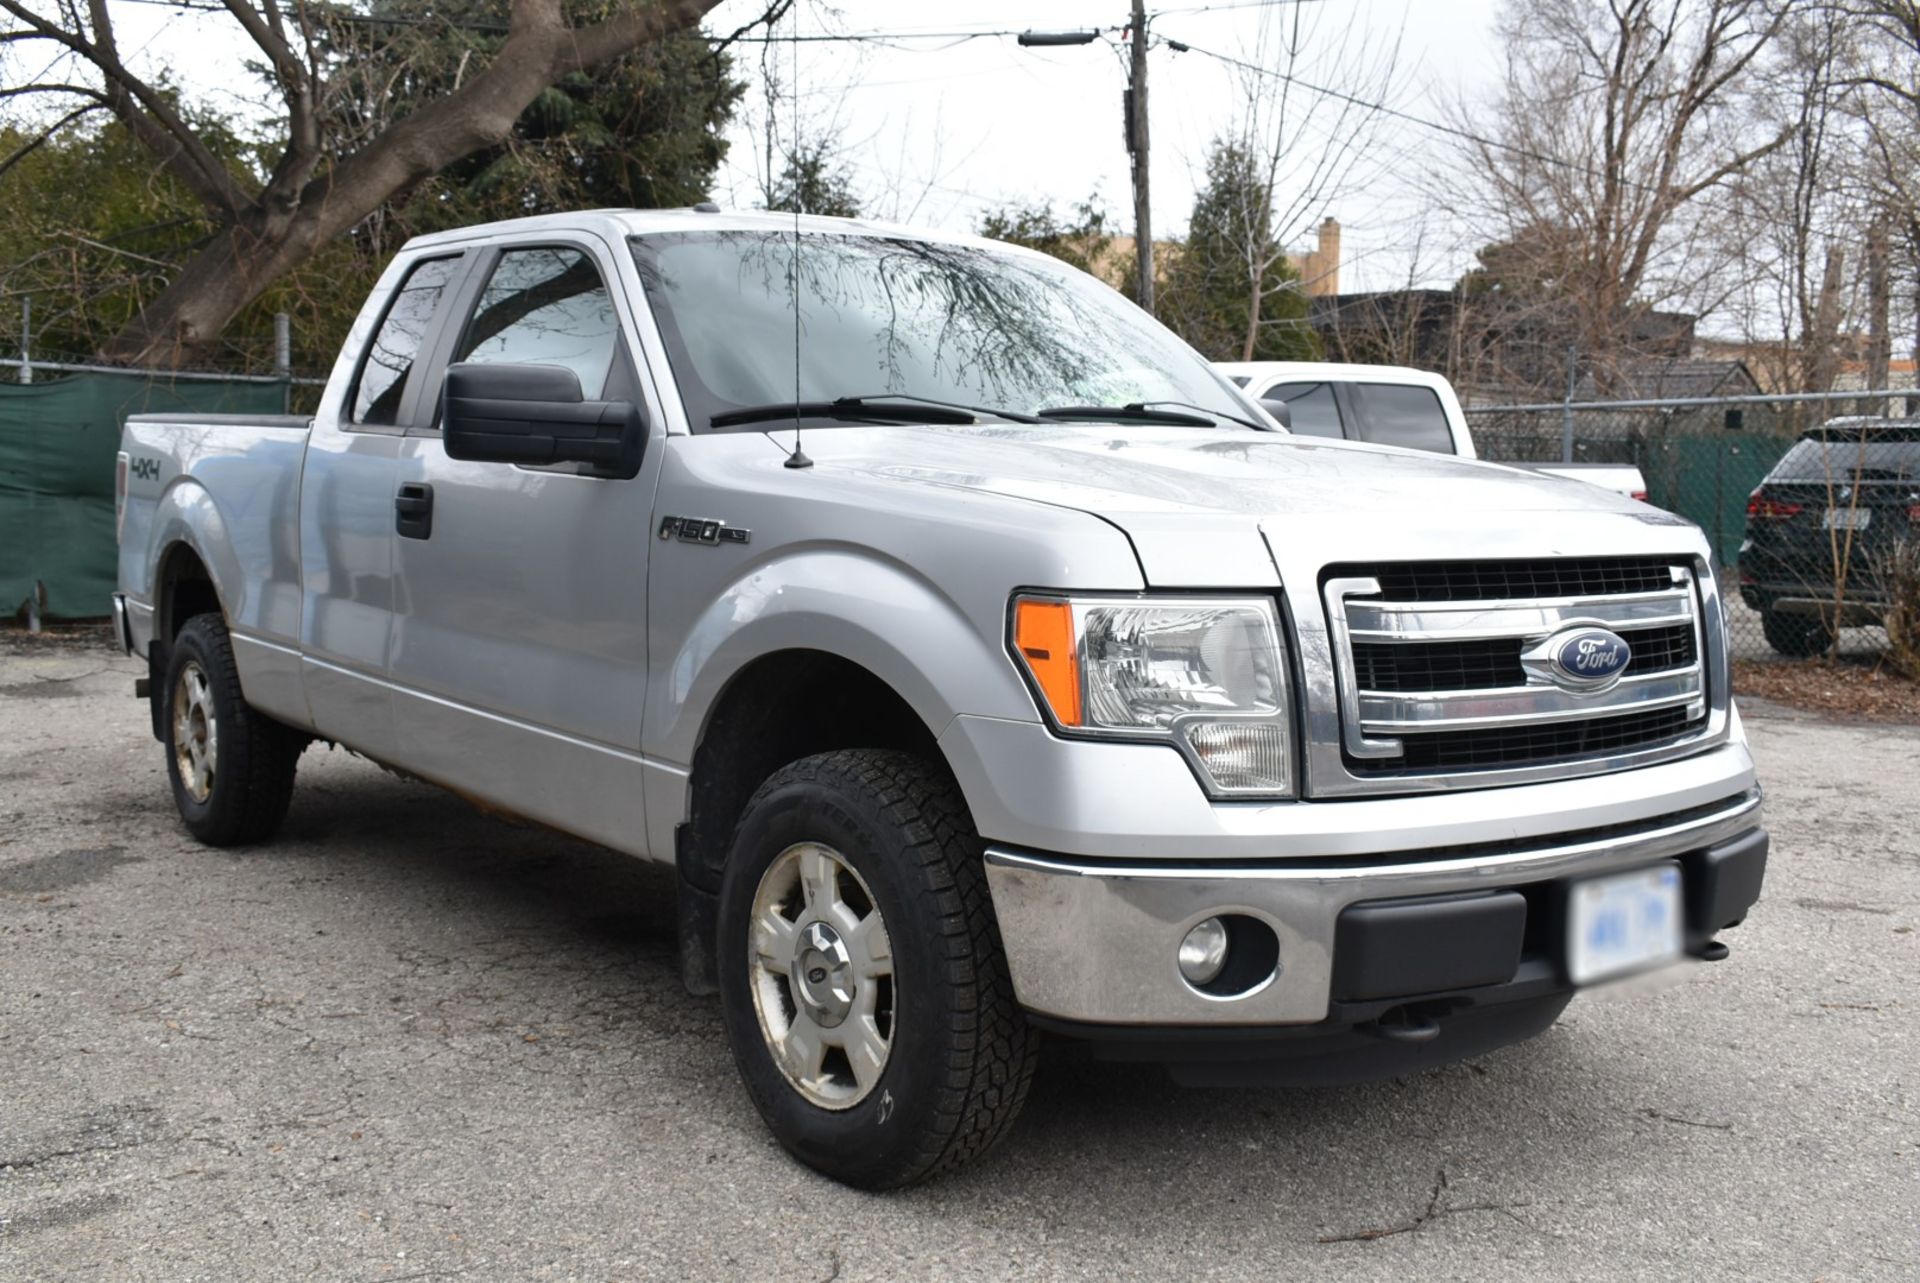 FORD (2014) F150XLT EXTENDED CAB PICKUP TRUCK WITH 3.7 LITER V6 ENGINE, 4X4, AUTO TRANSMISSION, - Image 5 of 13